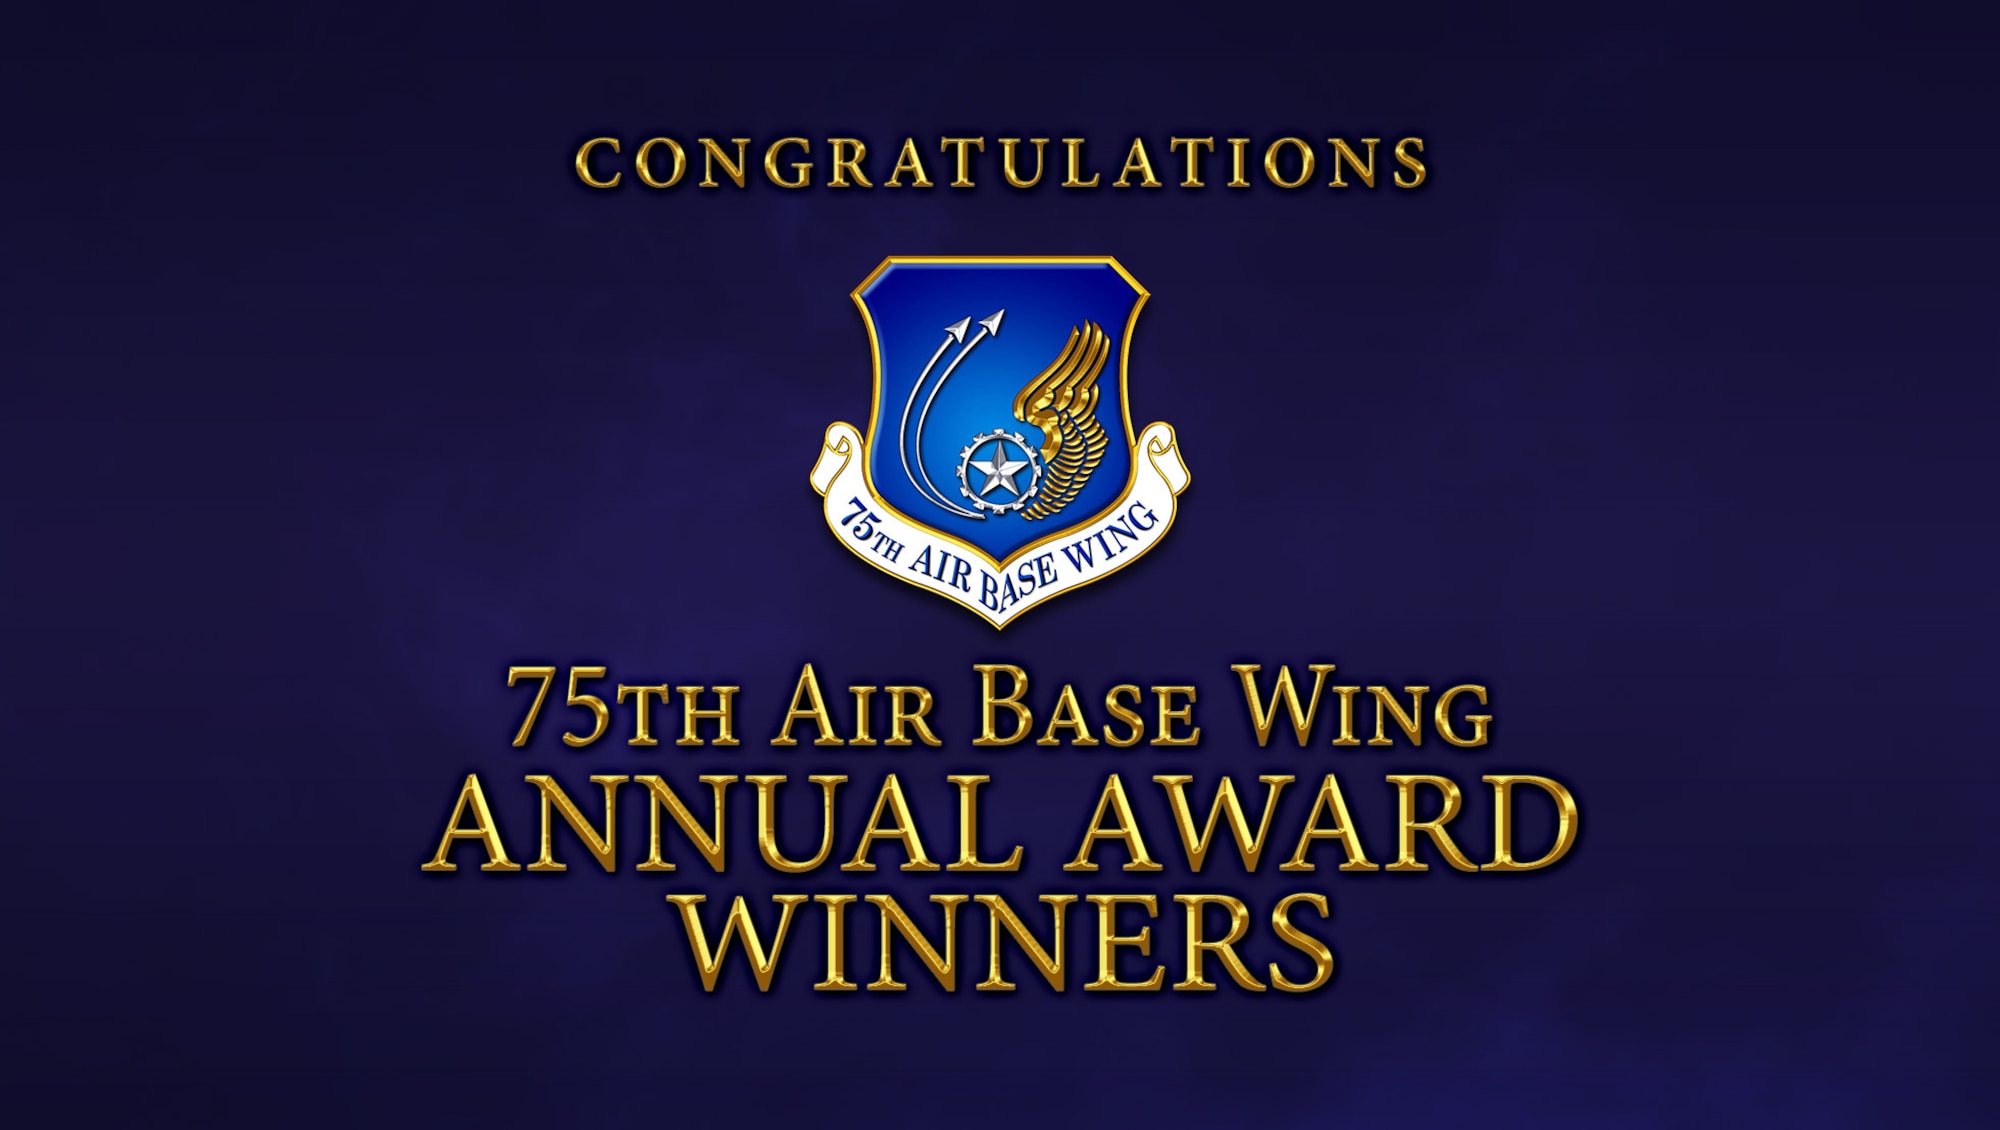 Congratulations 75th Air Base Wing Annual Award Winners and the 75th ABW emblem appear on a dark blue background.